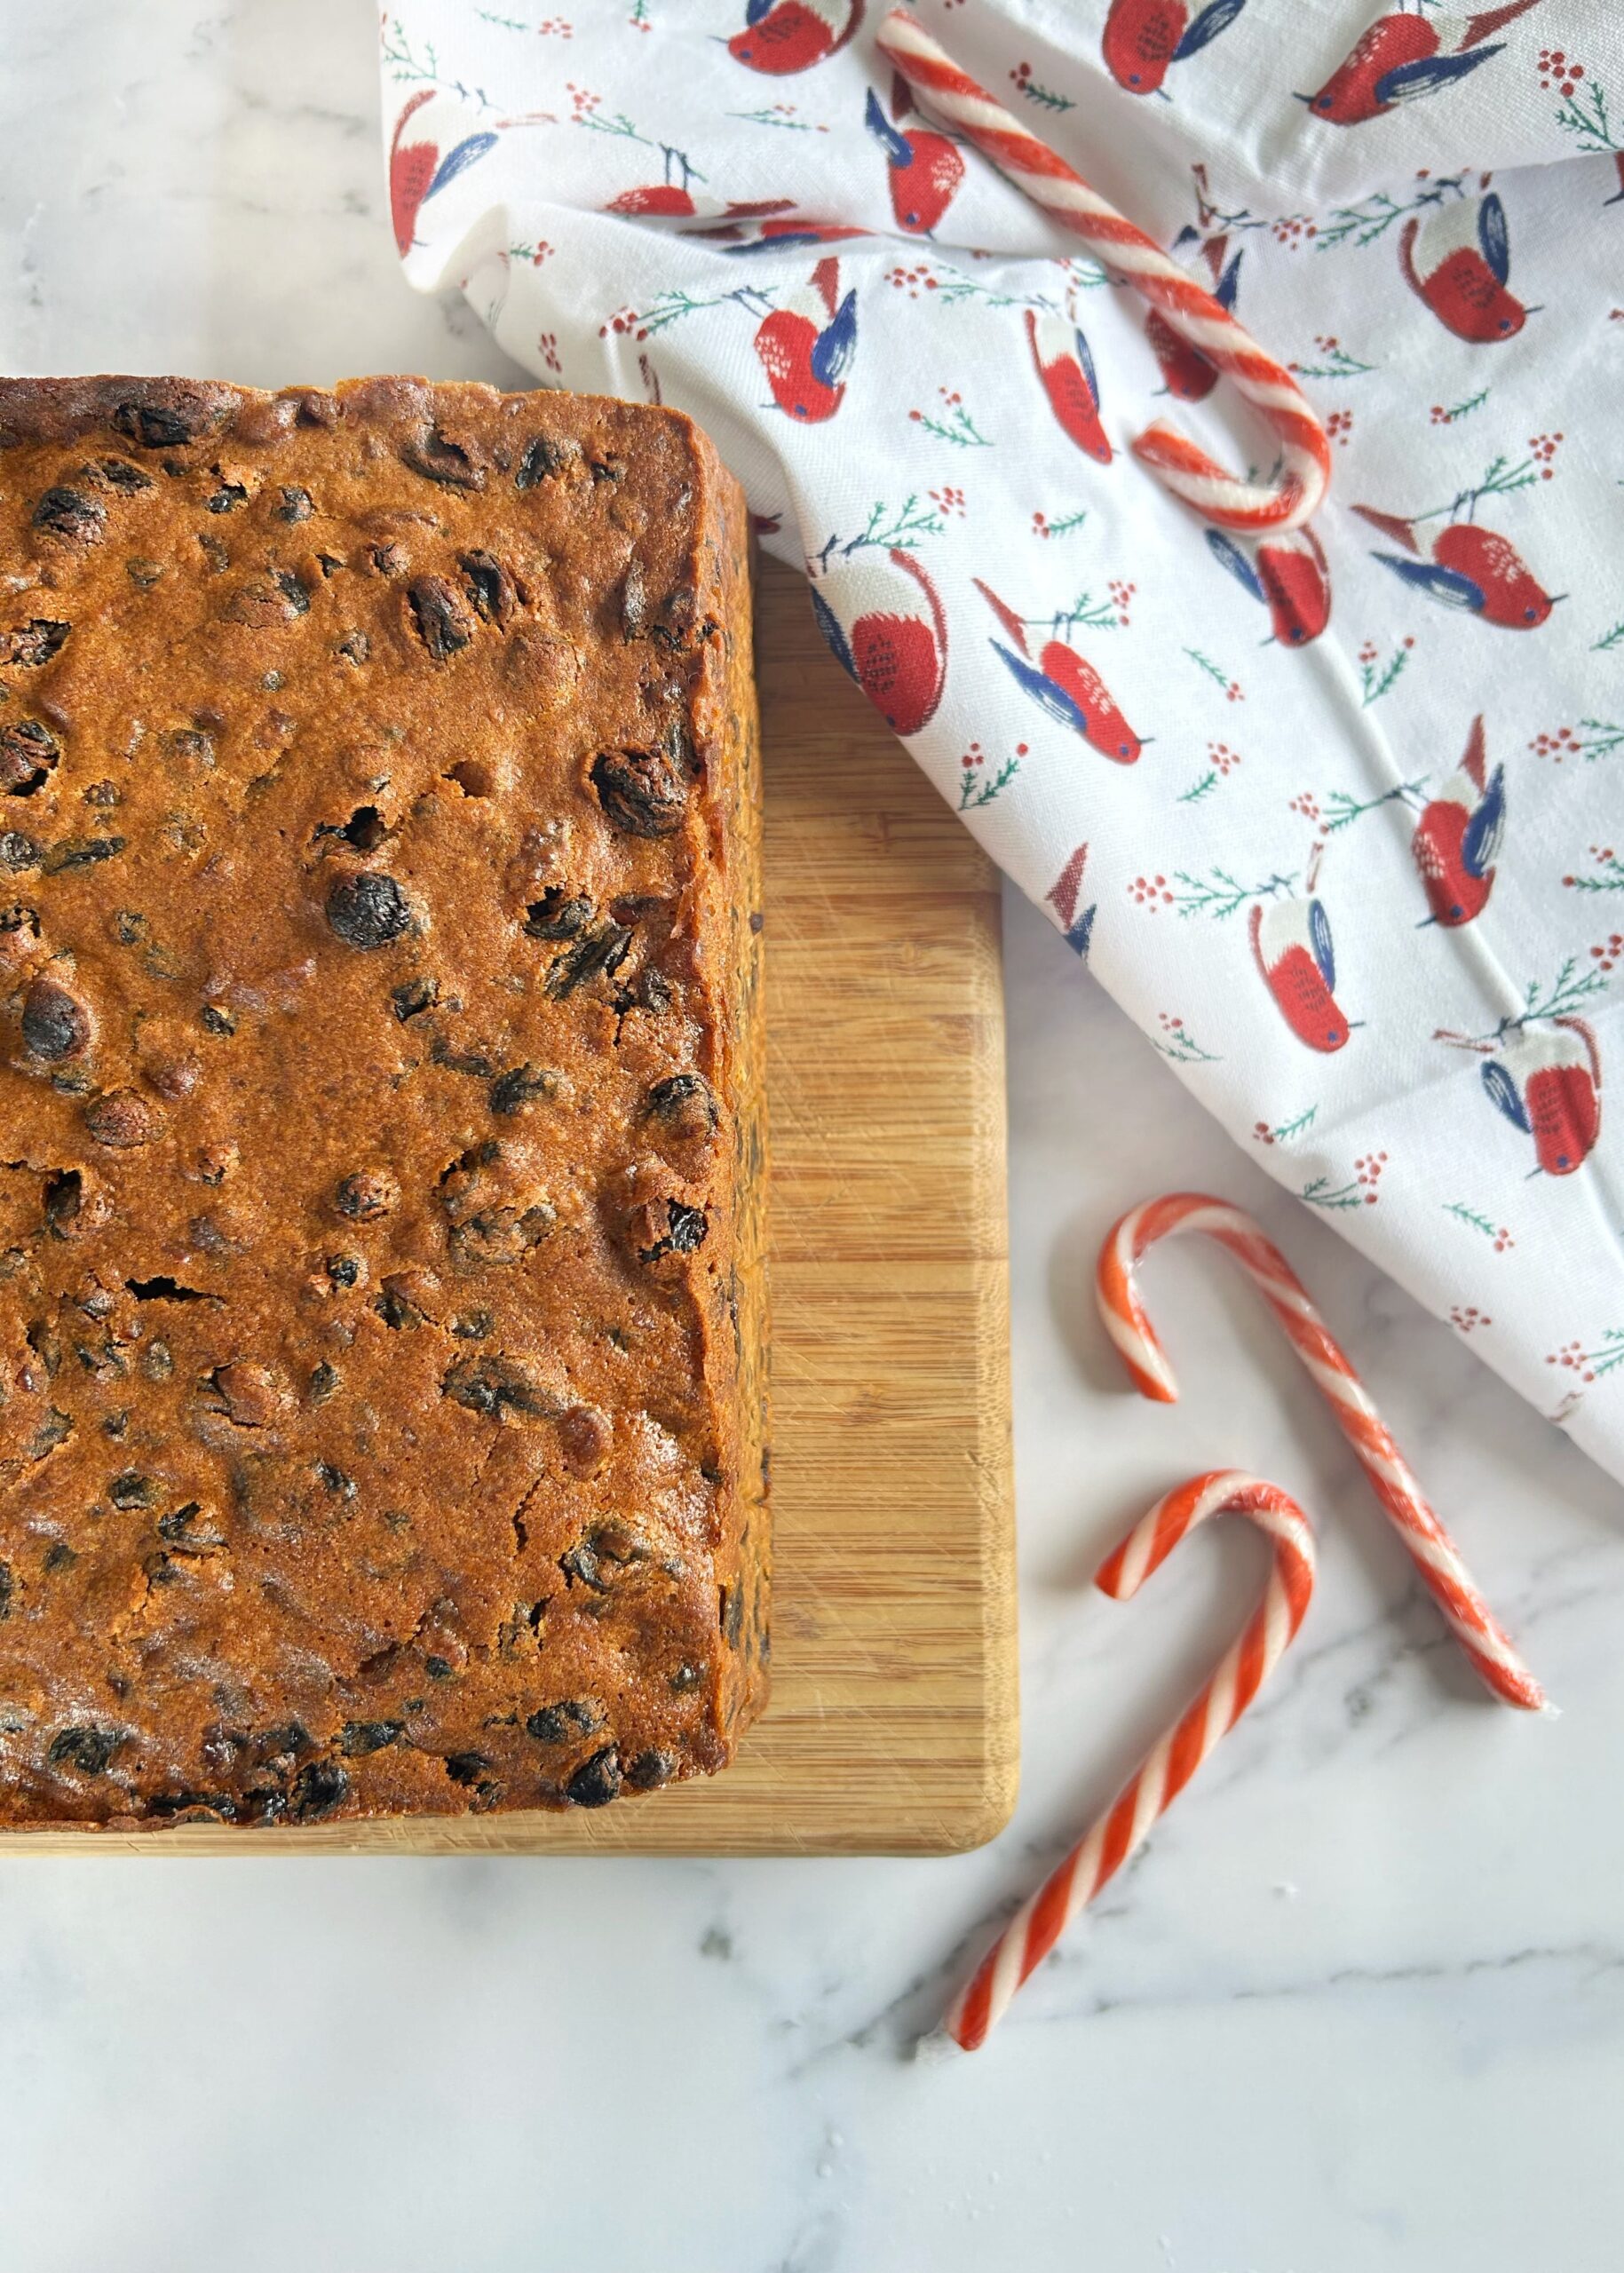 Felicity’s Tried and Tested – Best Ever Christmas Cake